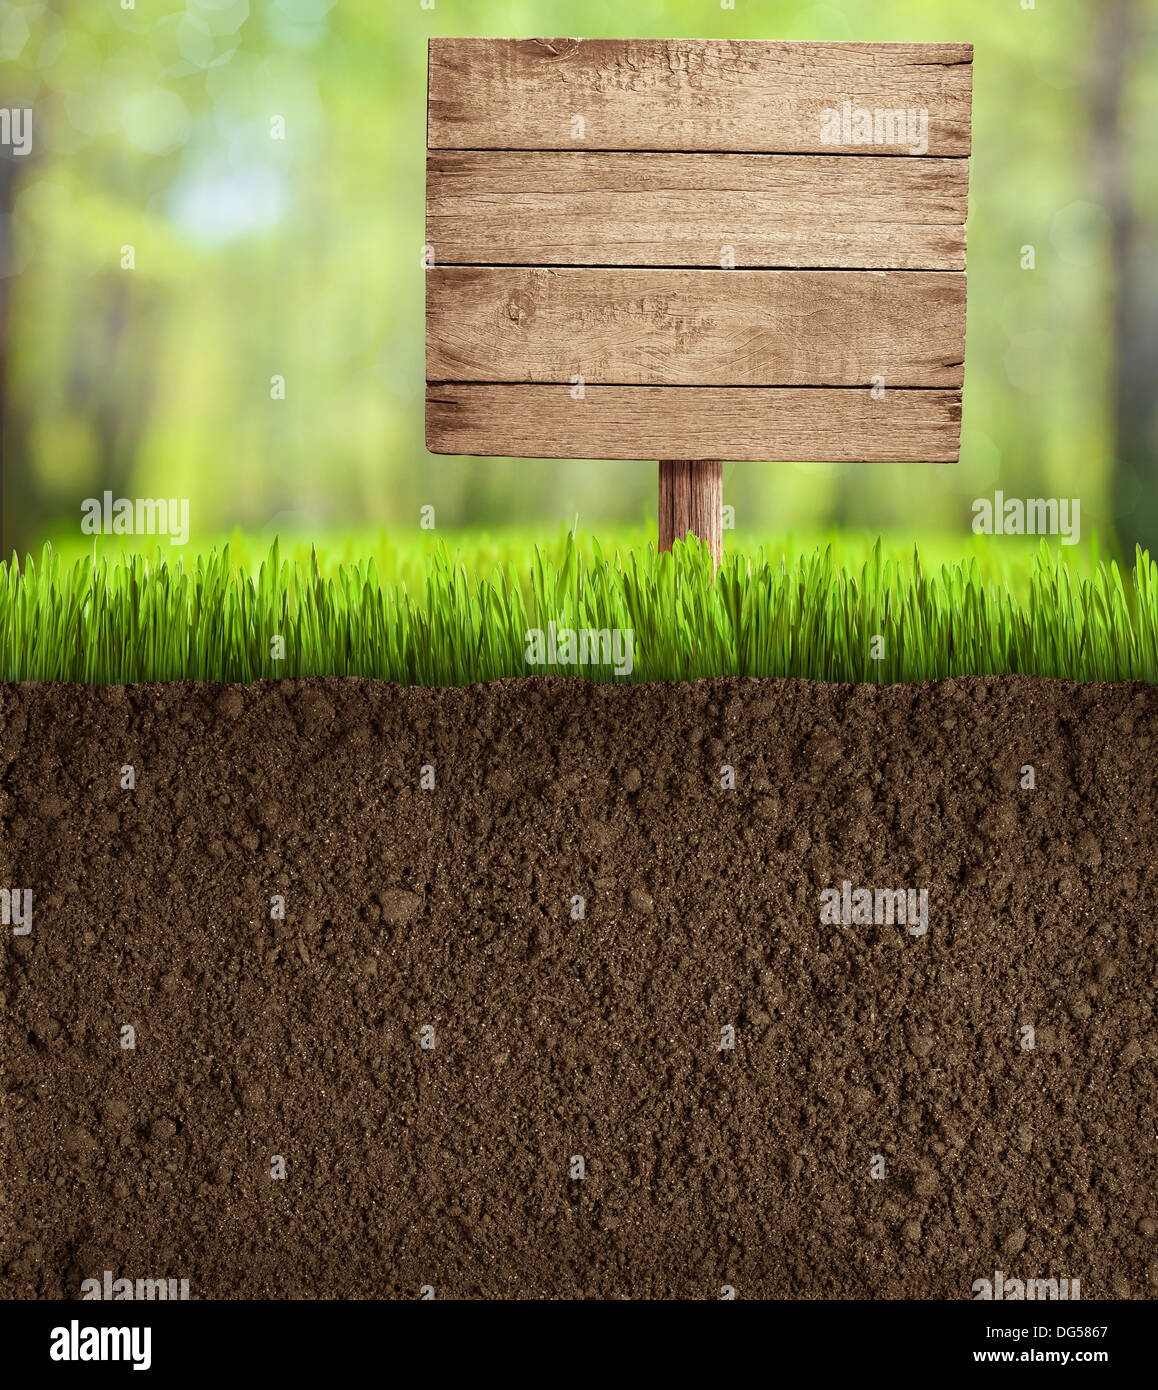 soil cut in garden with wooden sign Stock Photo